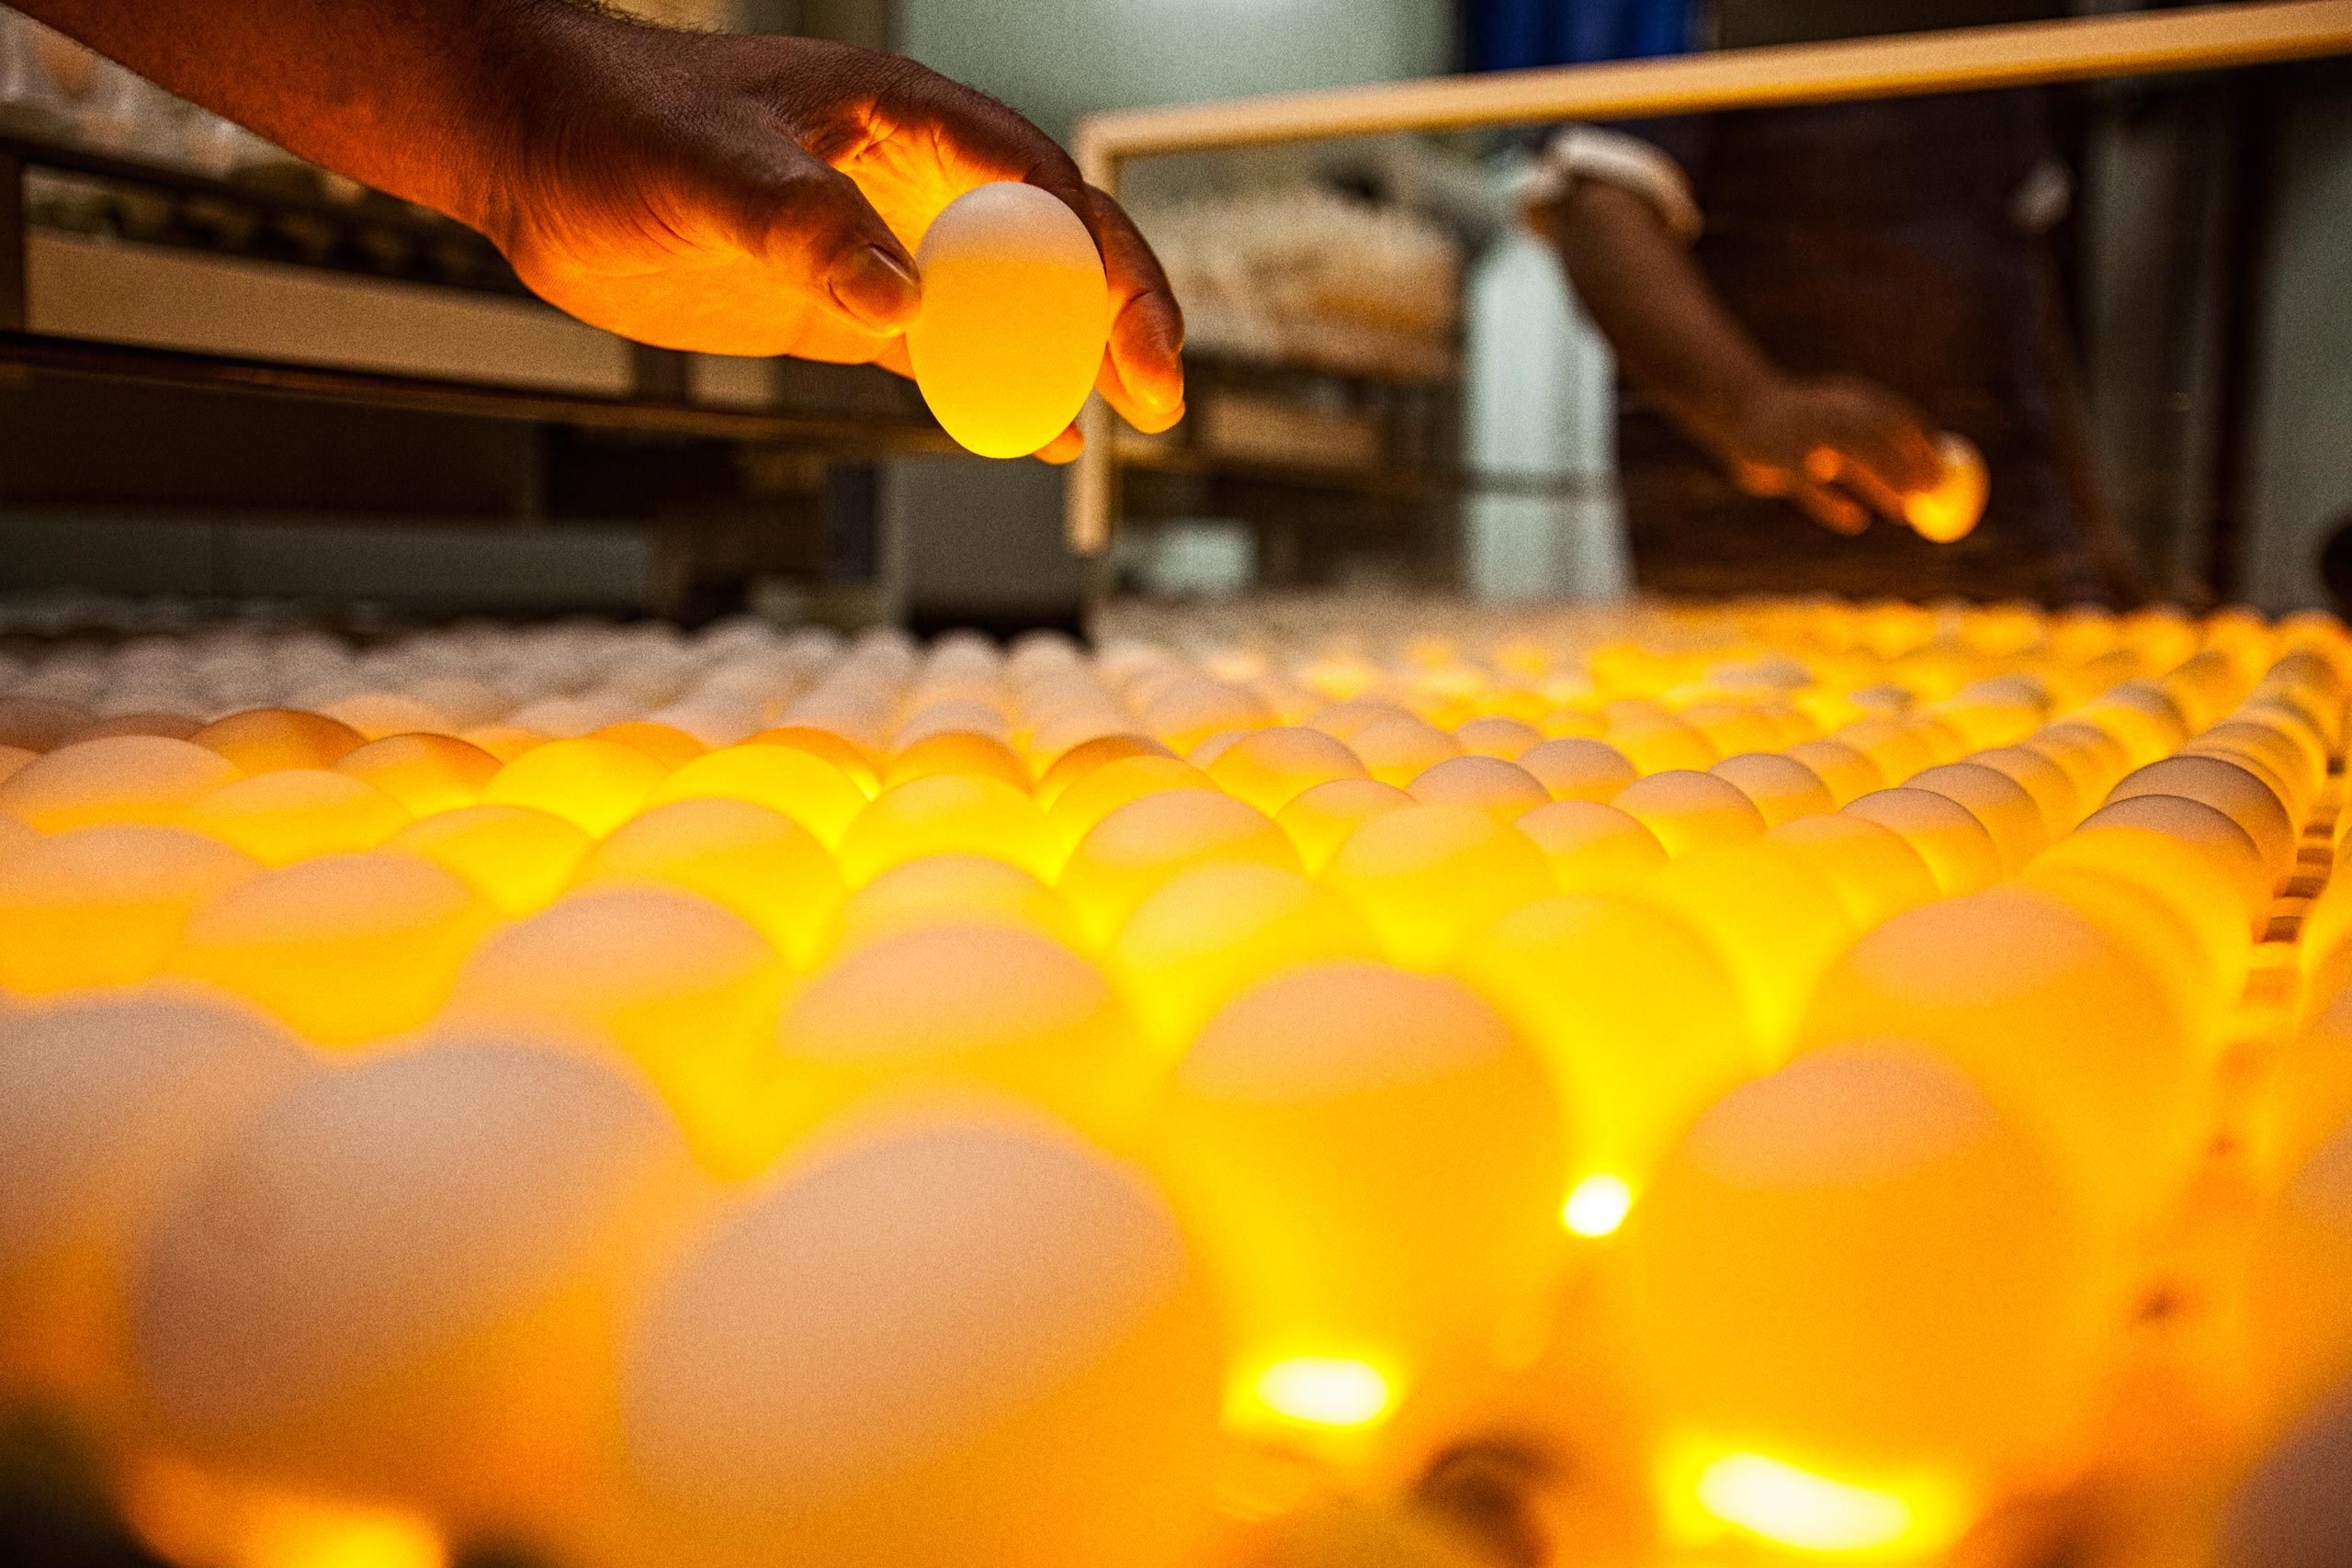 Inspecting an Egg by Hand